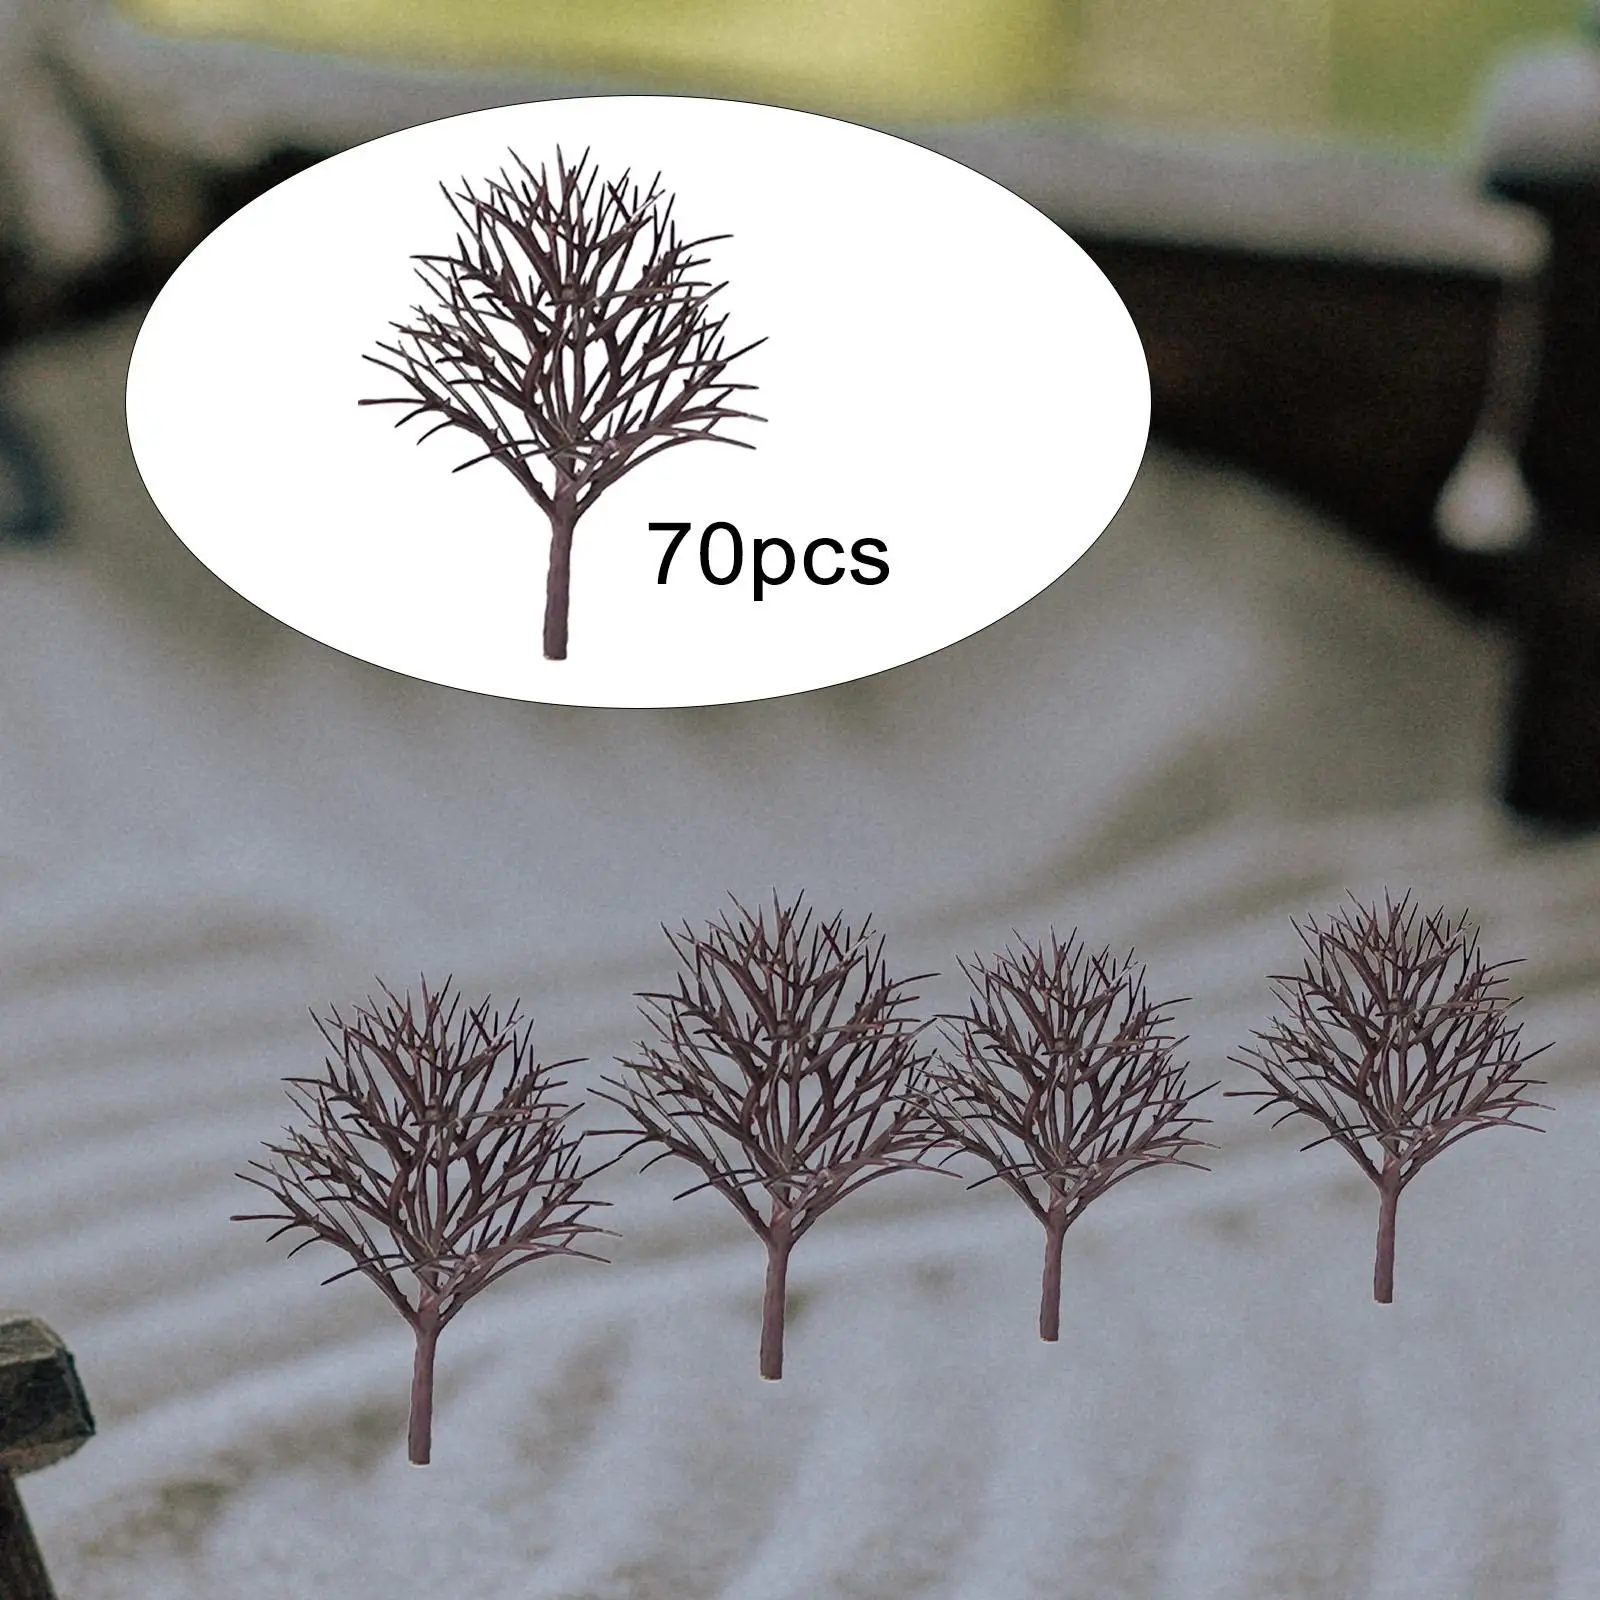 70 Pieces Mini Model Trees Diorama Supplies 6cm Train Scenery Architecture Trees for Building Model Scenery Landscape Sand Table